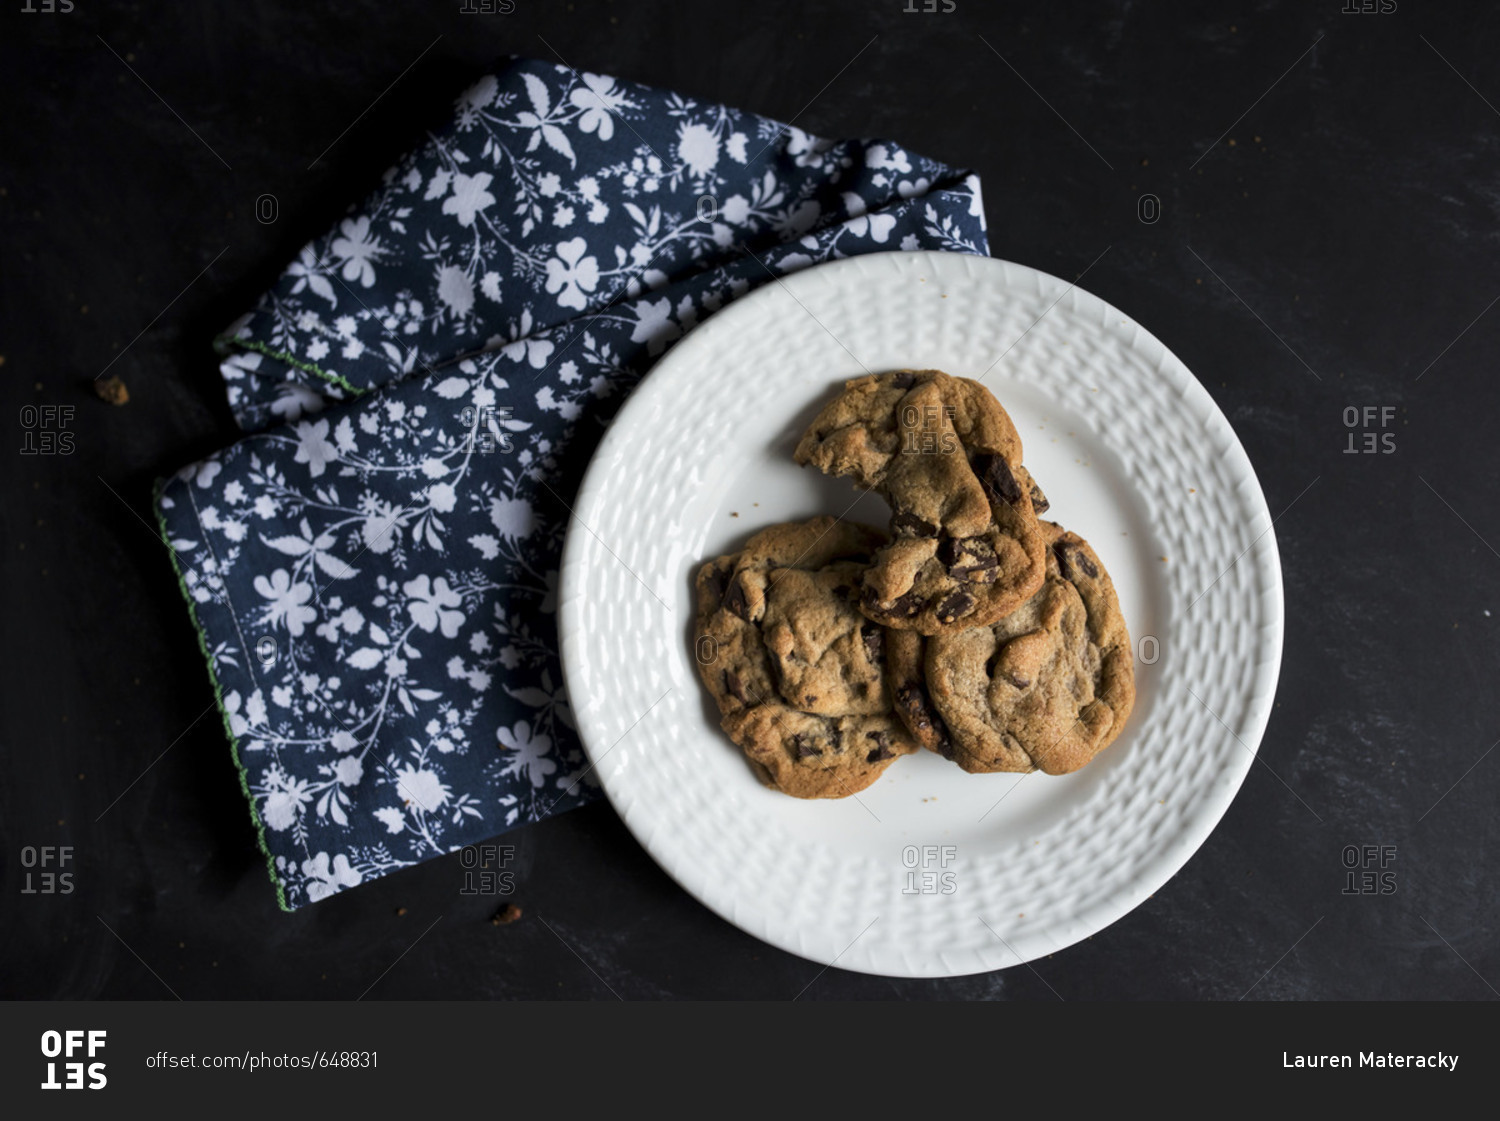 Freshly baked chocolate chip cookies on a plate with a bite missing from one